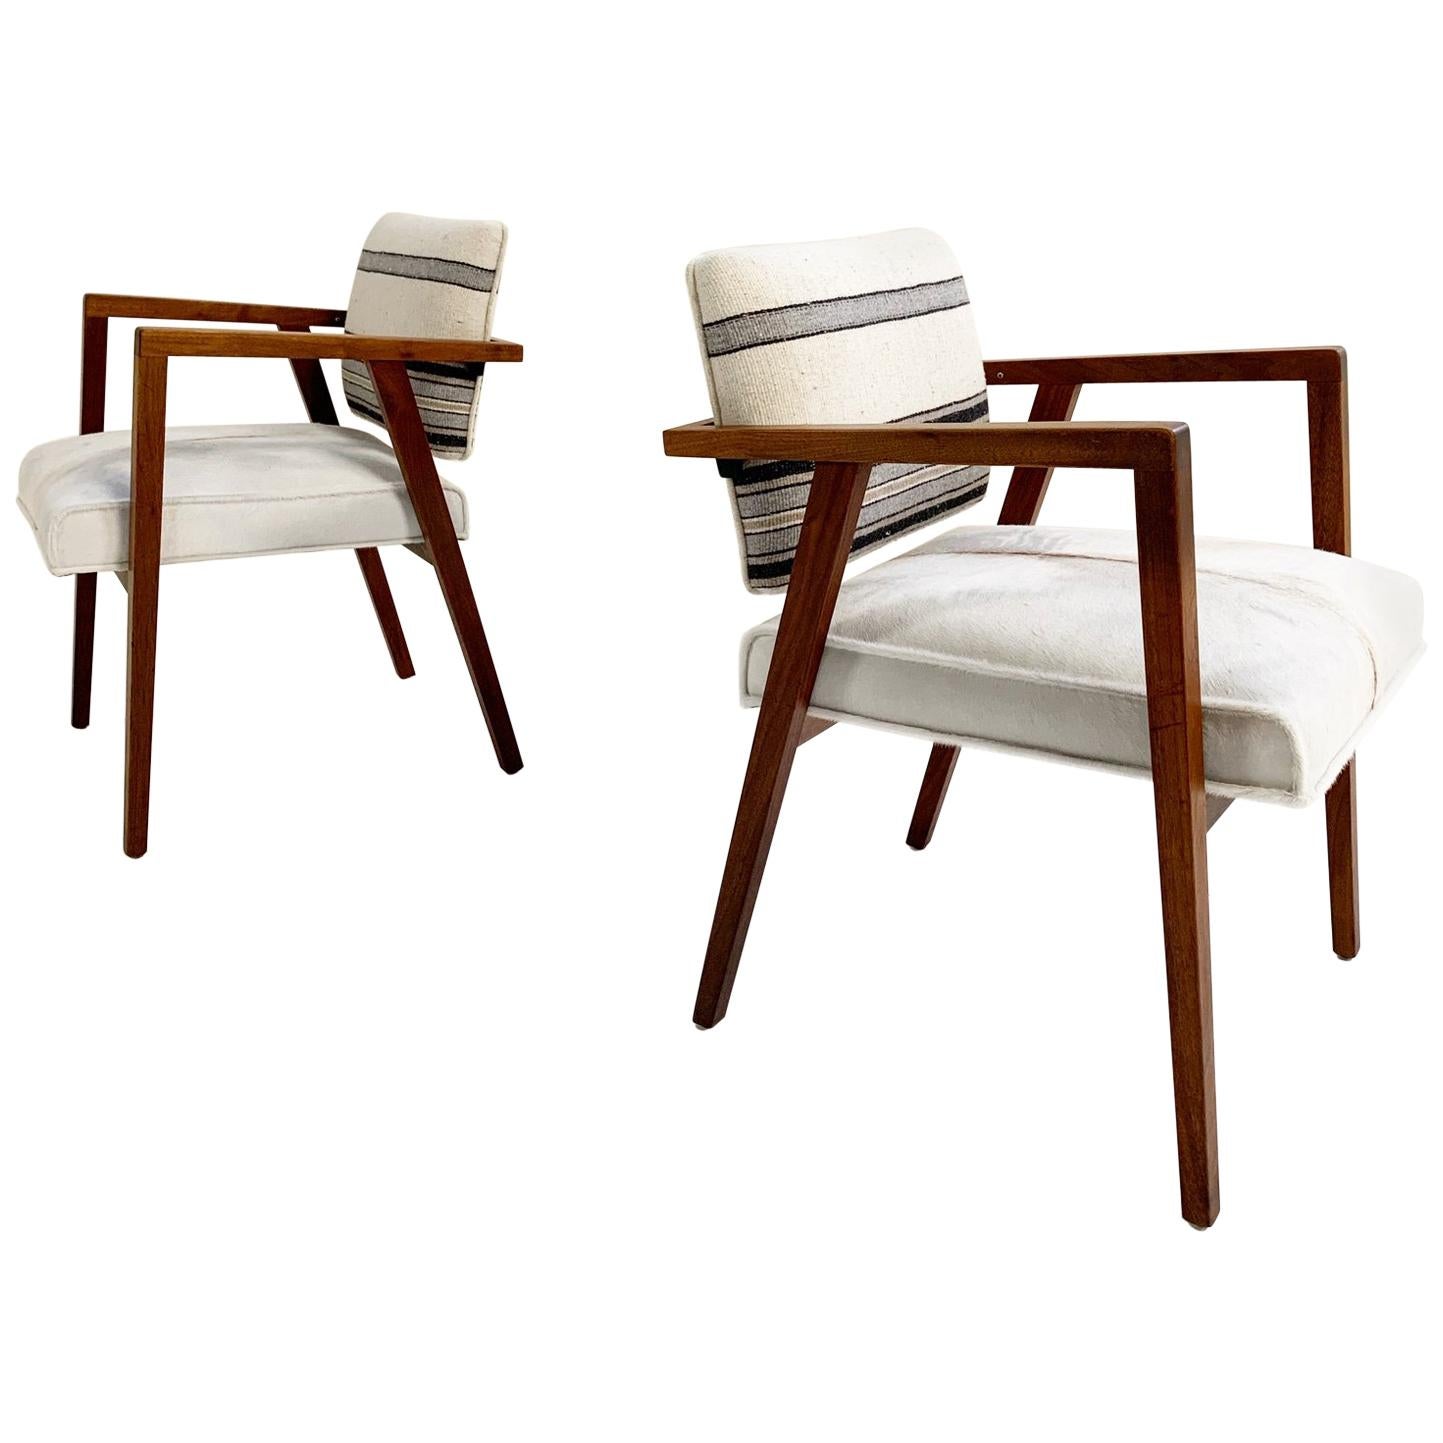 Franco Albini for Knoll Model 48 Chairs in Calfskin and Isabel Marant Silk Wool